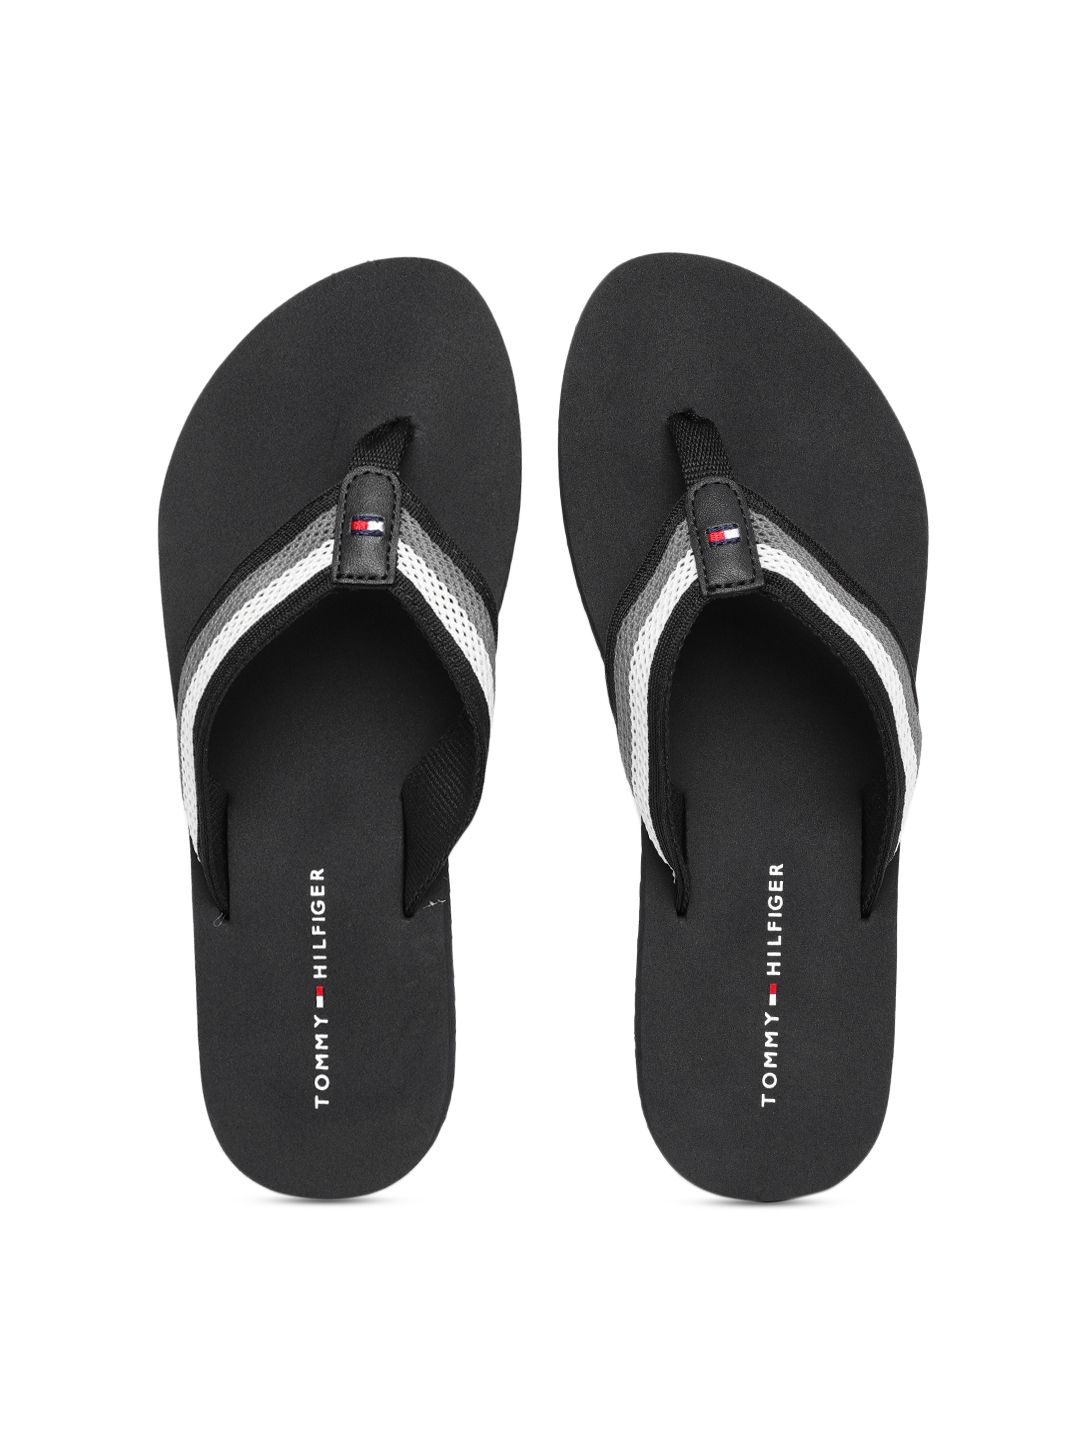 Tommy Hilfiger Black Flip Flops for women - Get stylish shoes for Every ...